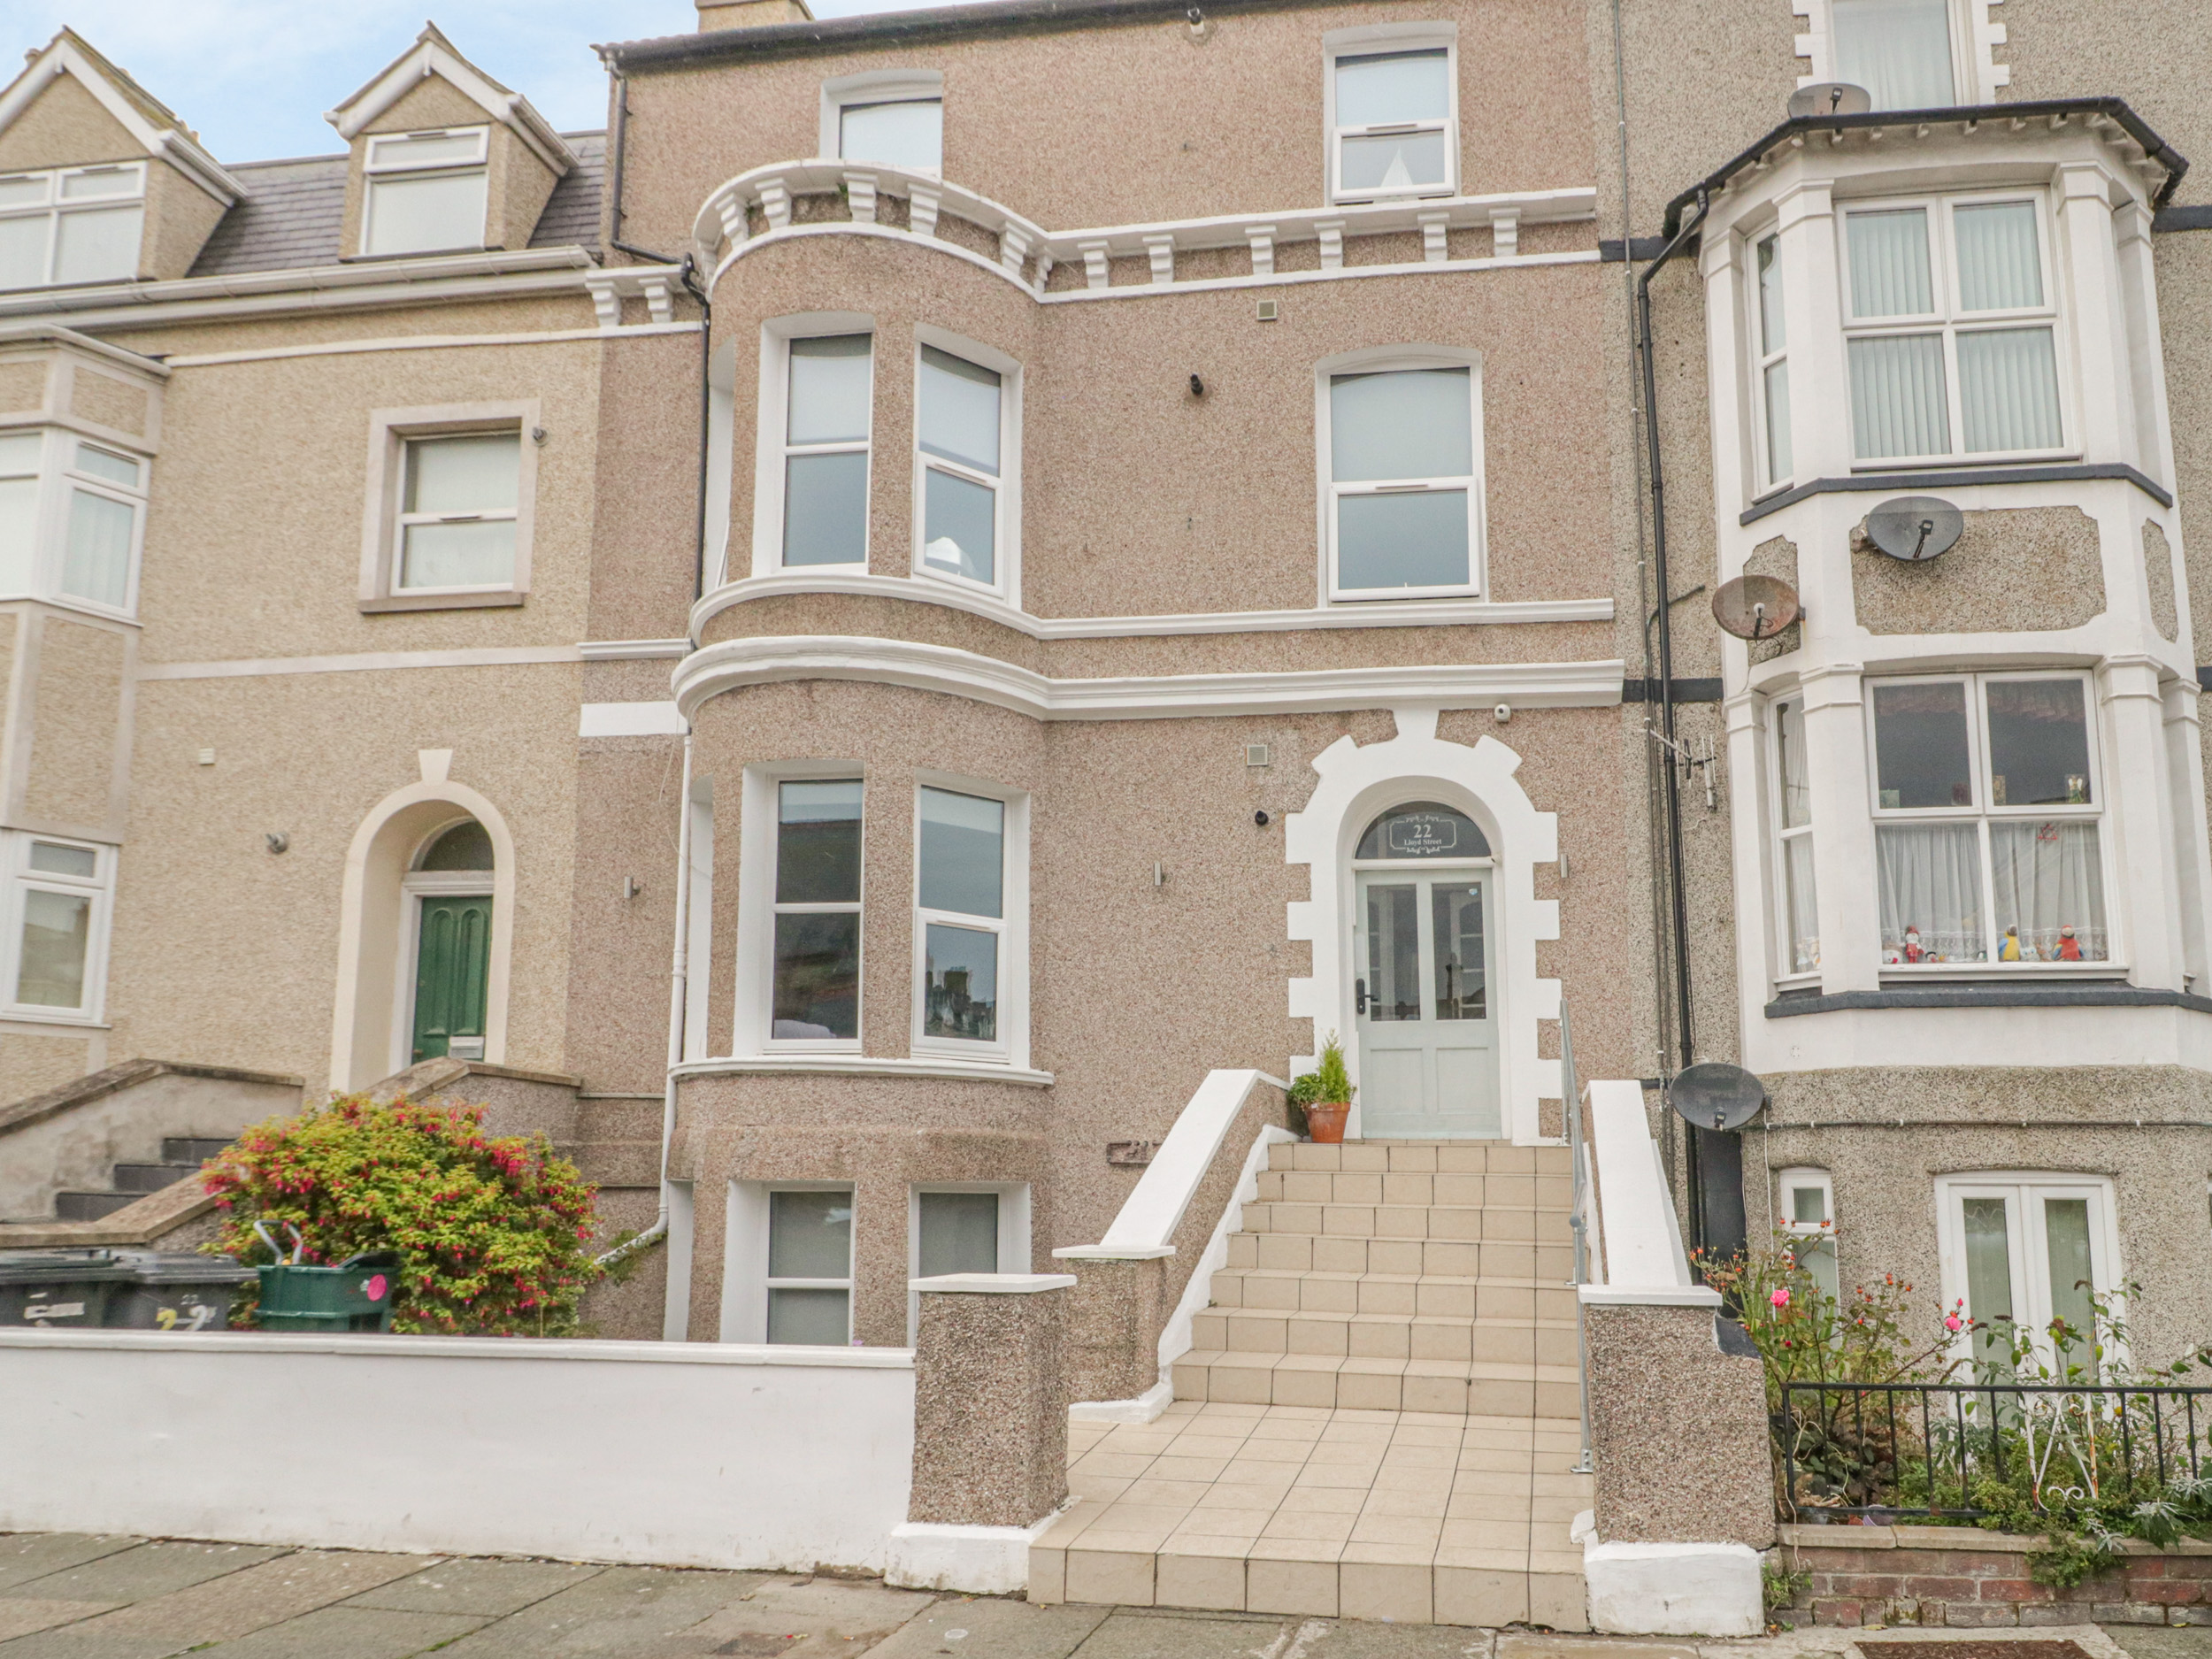 Cottages In Llandudno Apartments Alpha Holiday Lettings